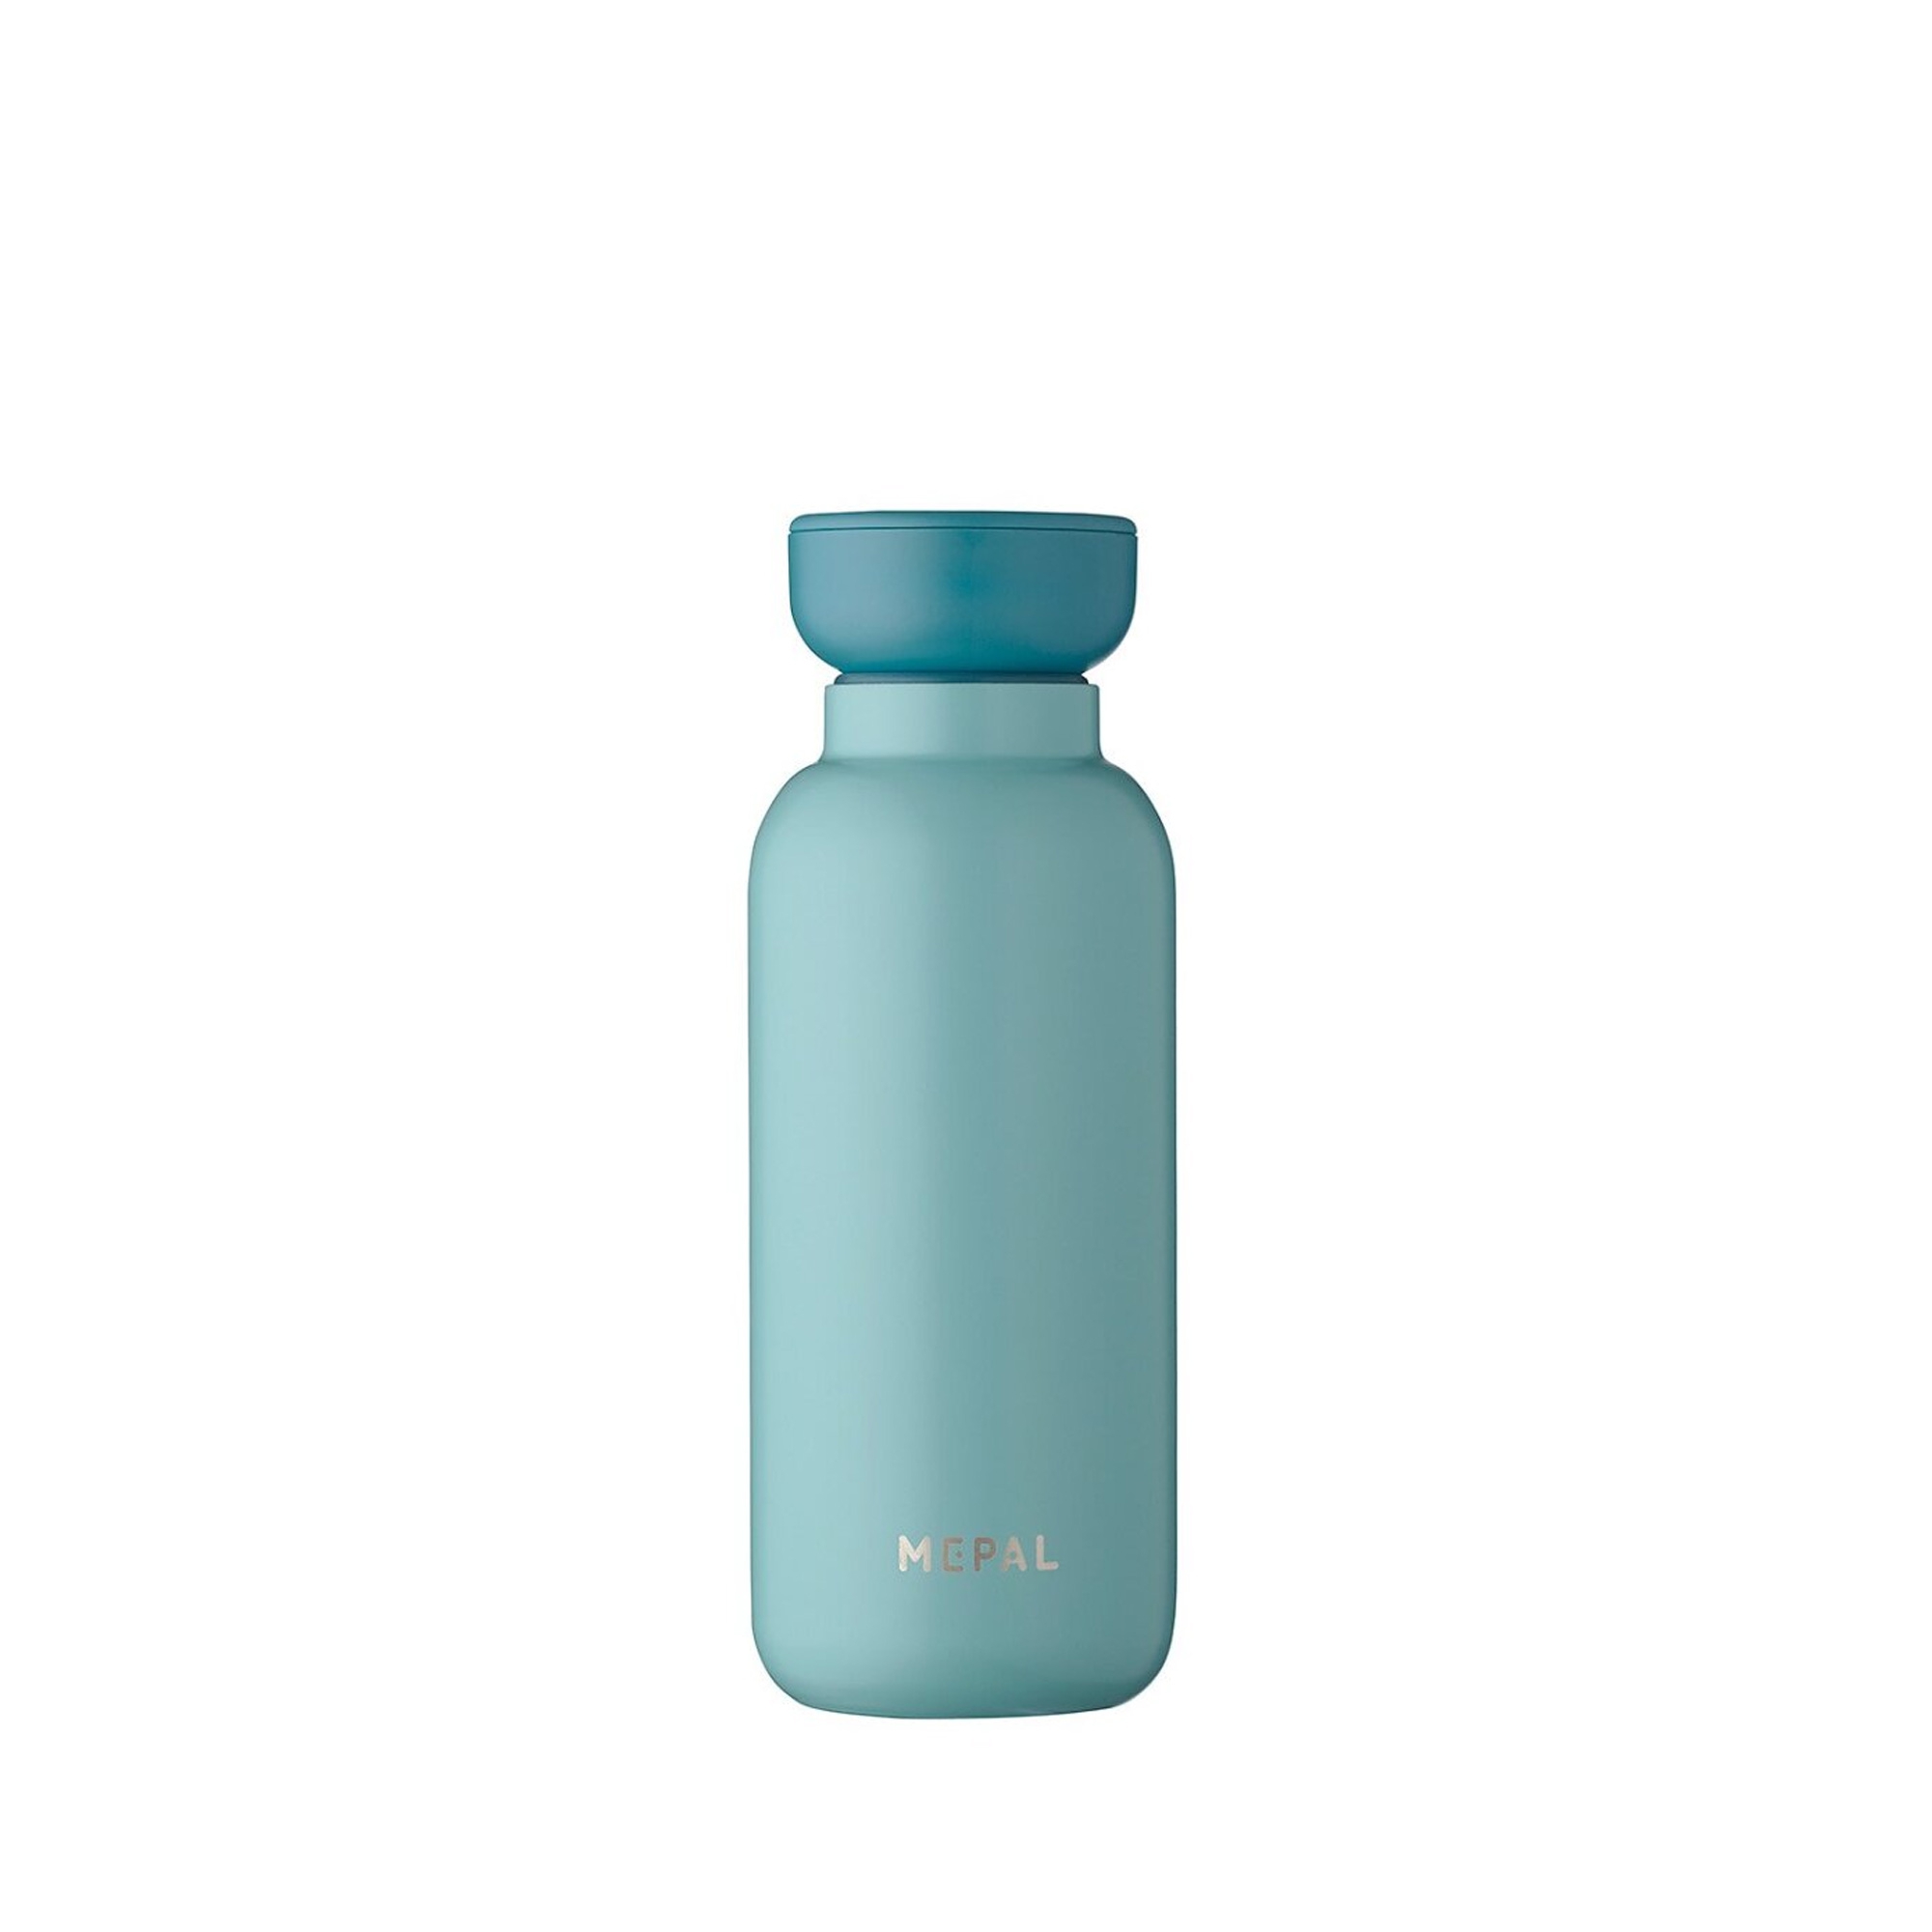 Mepal - Ellipse thermal bottle 350ml - different colors